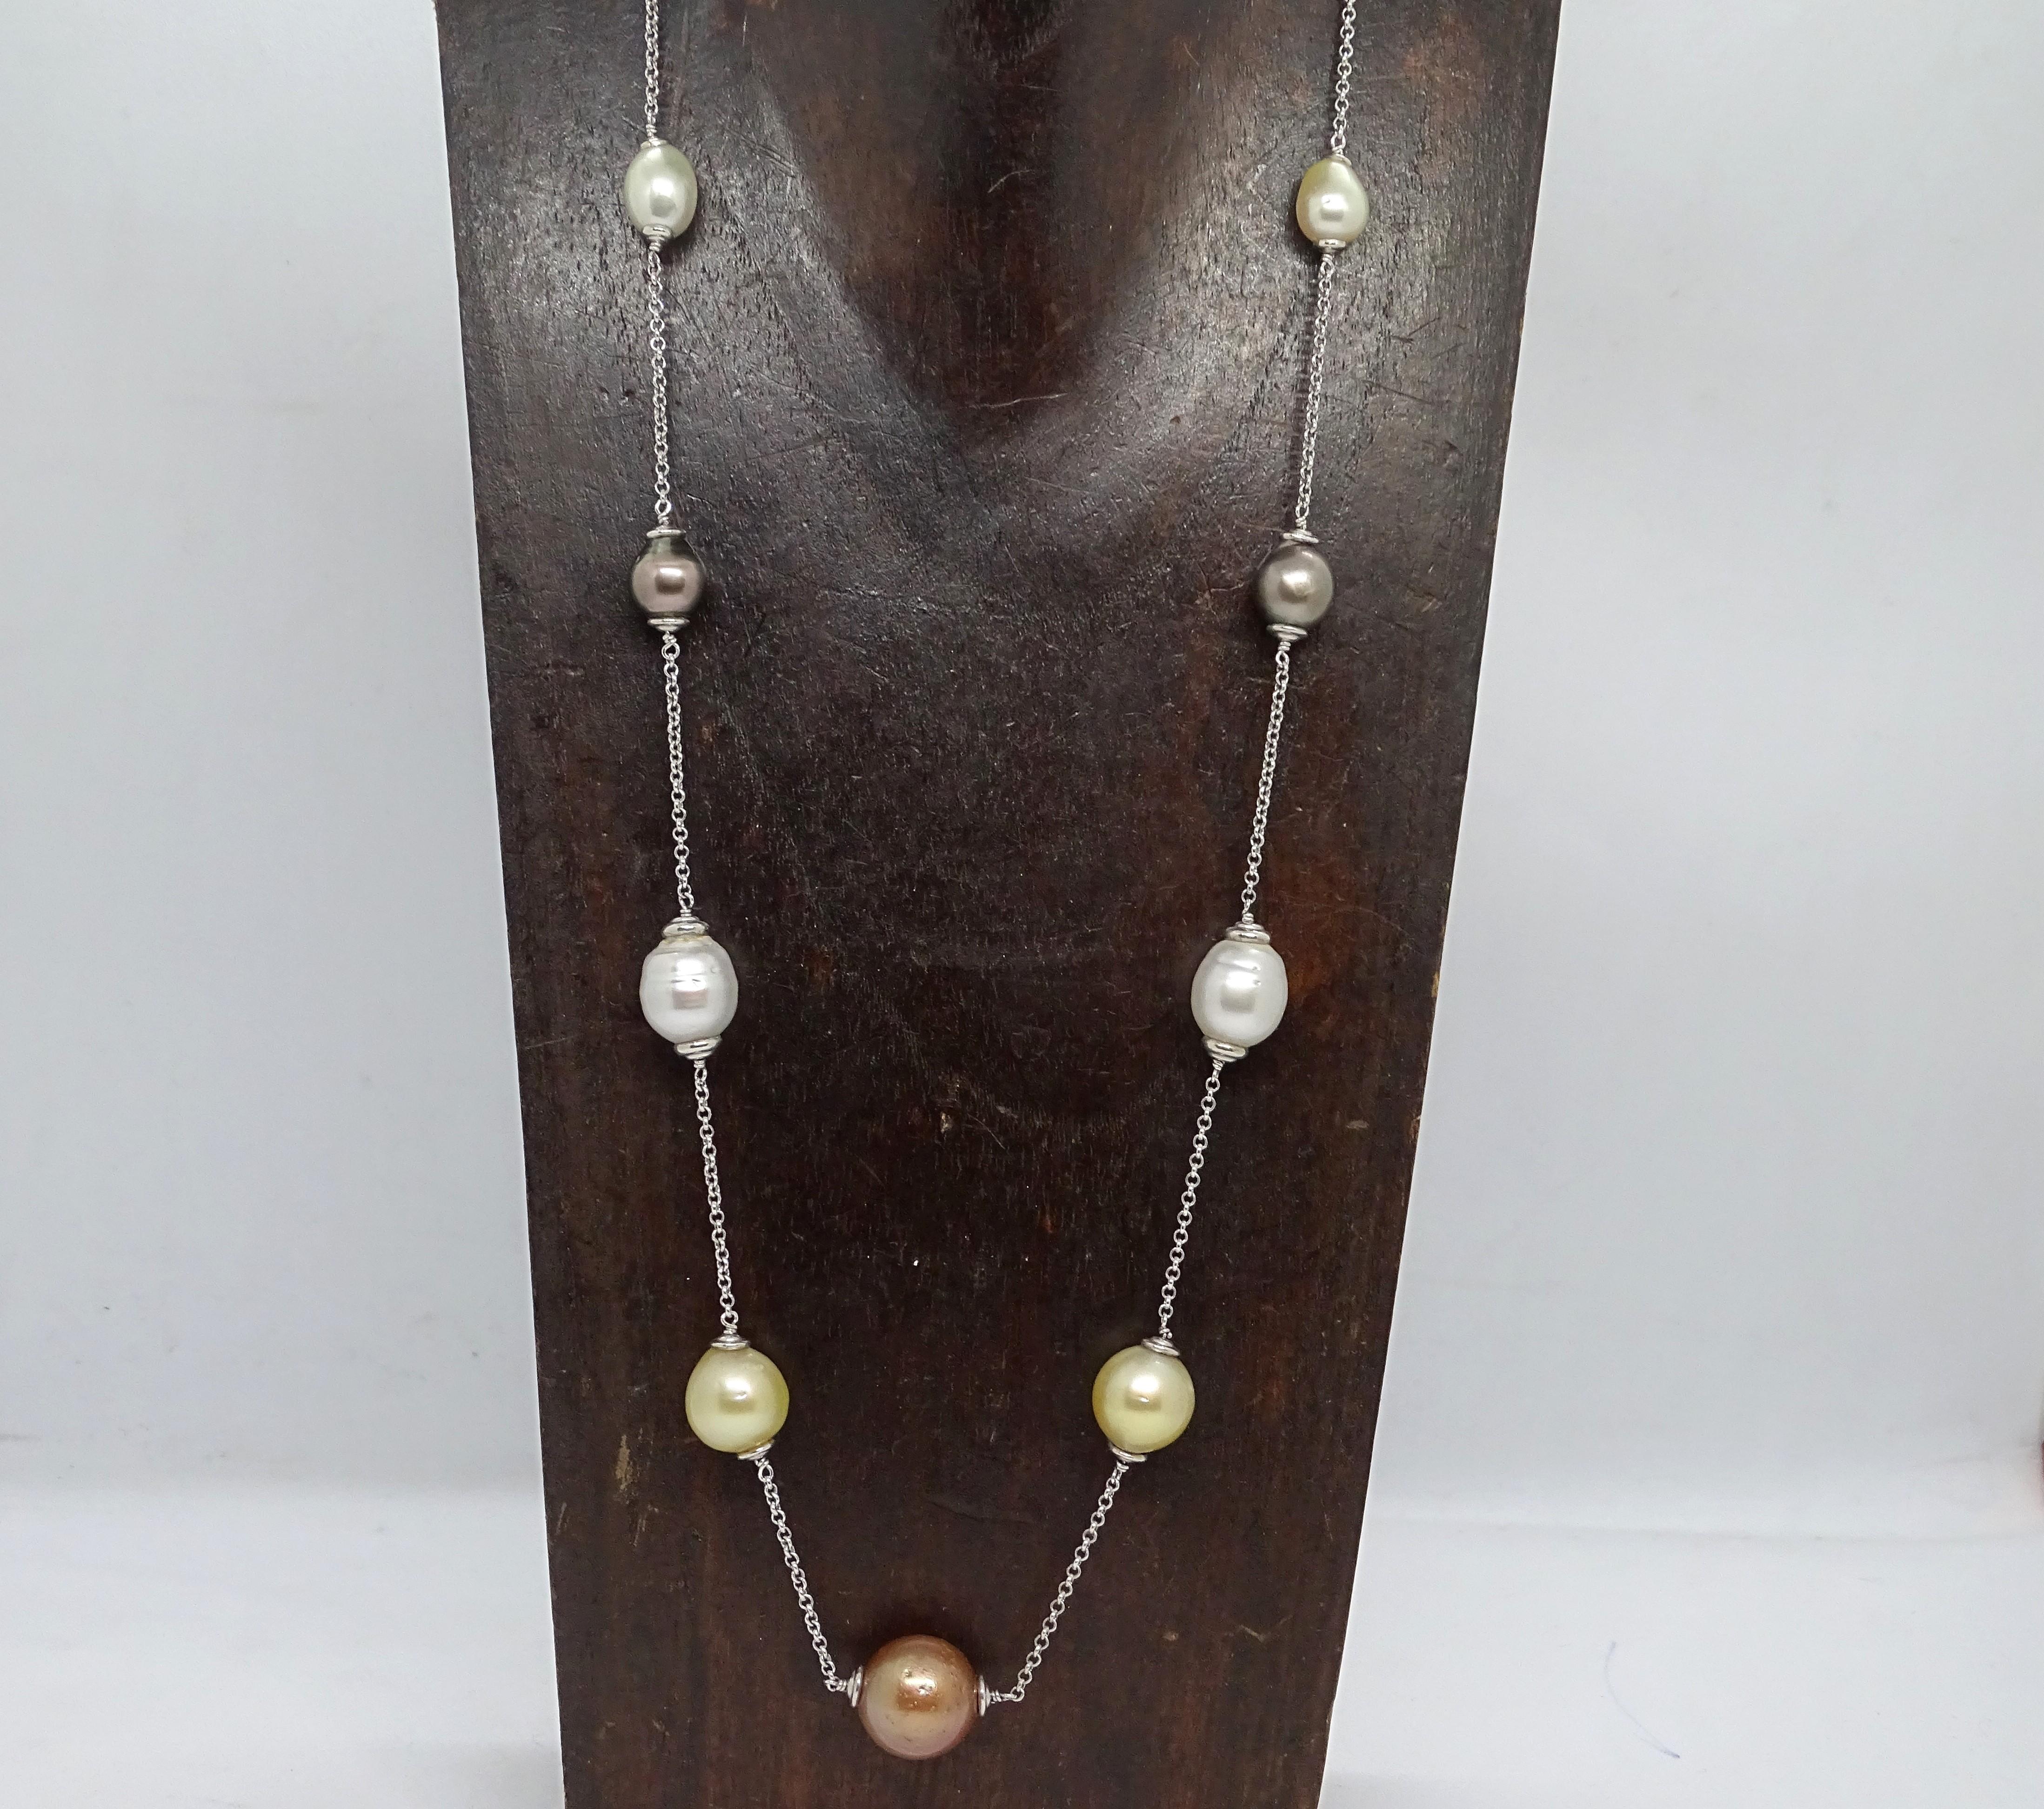 Australian, golden, tahitian and chocolate pearl necklace - white gold chain 4